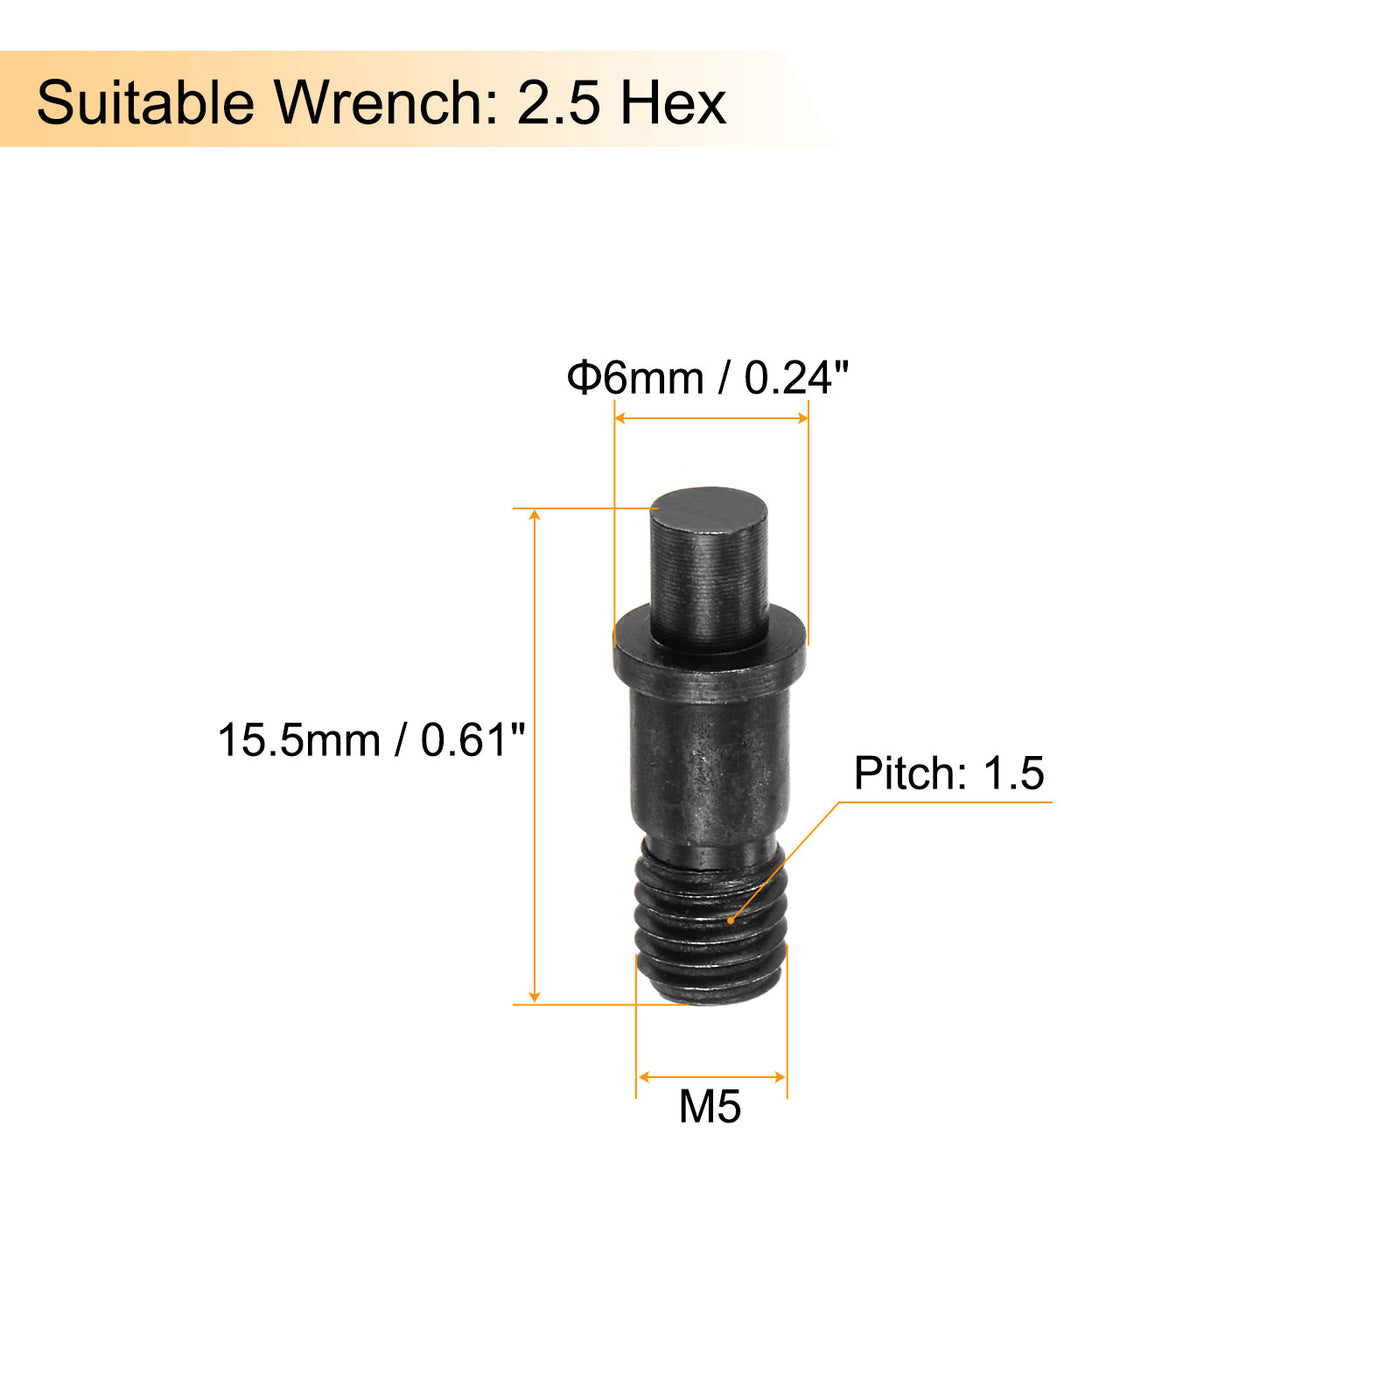 Uxcell Uxcell M5x15.5-0.8 Set Screws for Carbide Insert CNC Lathe Turning Tool Holder, 10Pcs